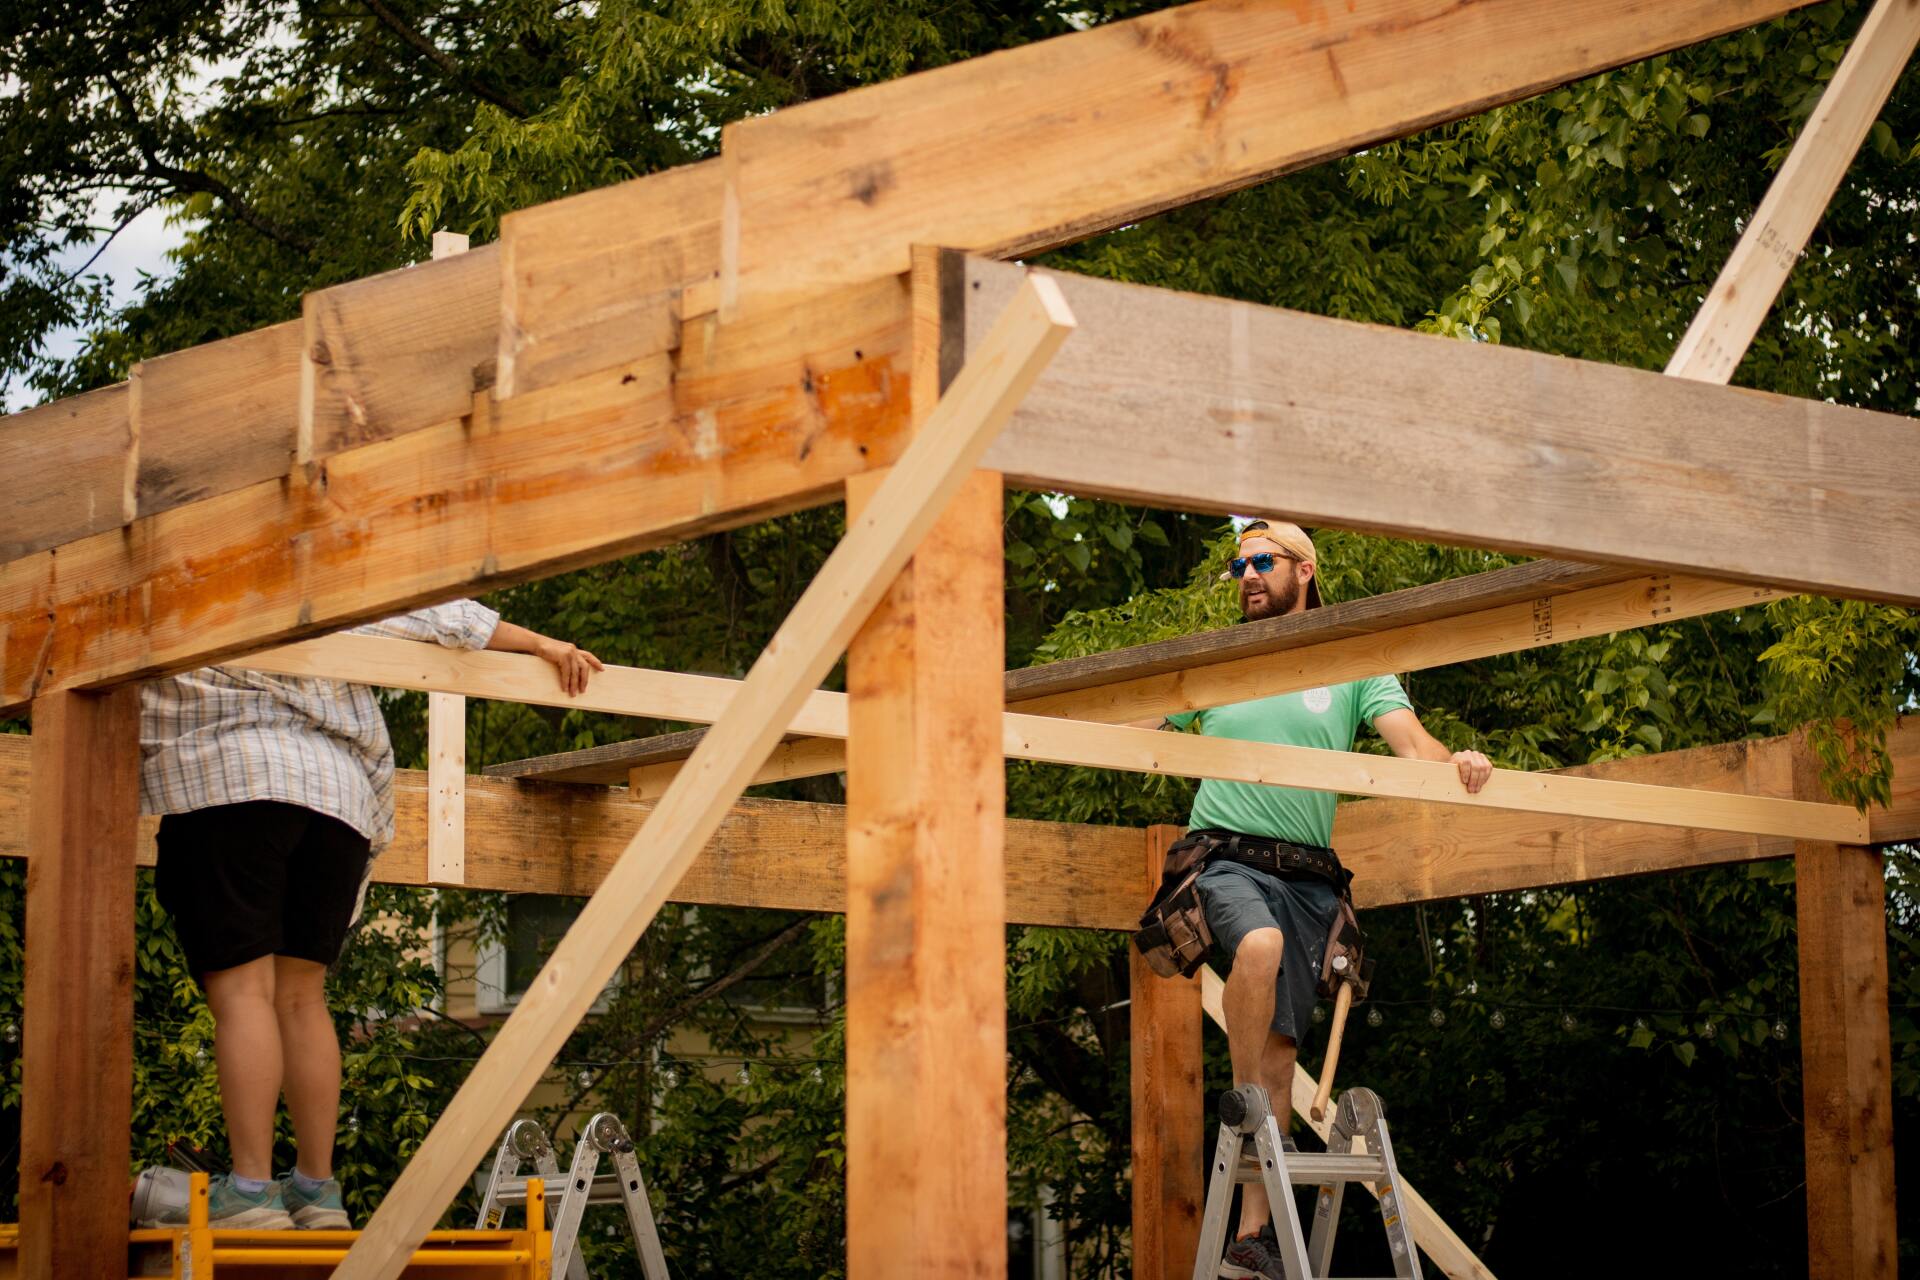 Photo of two individuals on ladders working on framing a building